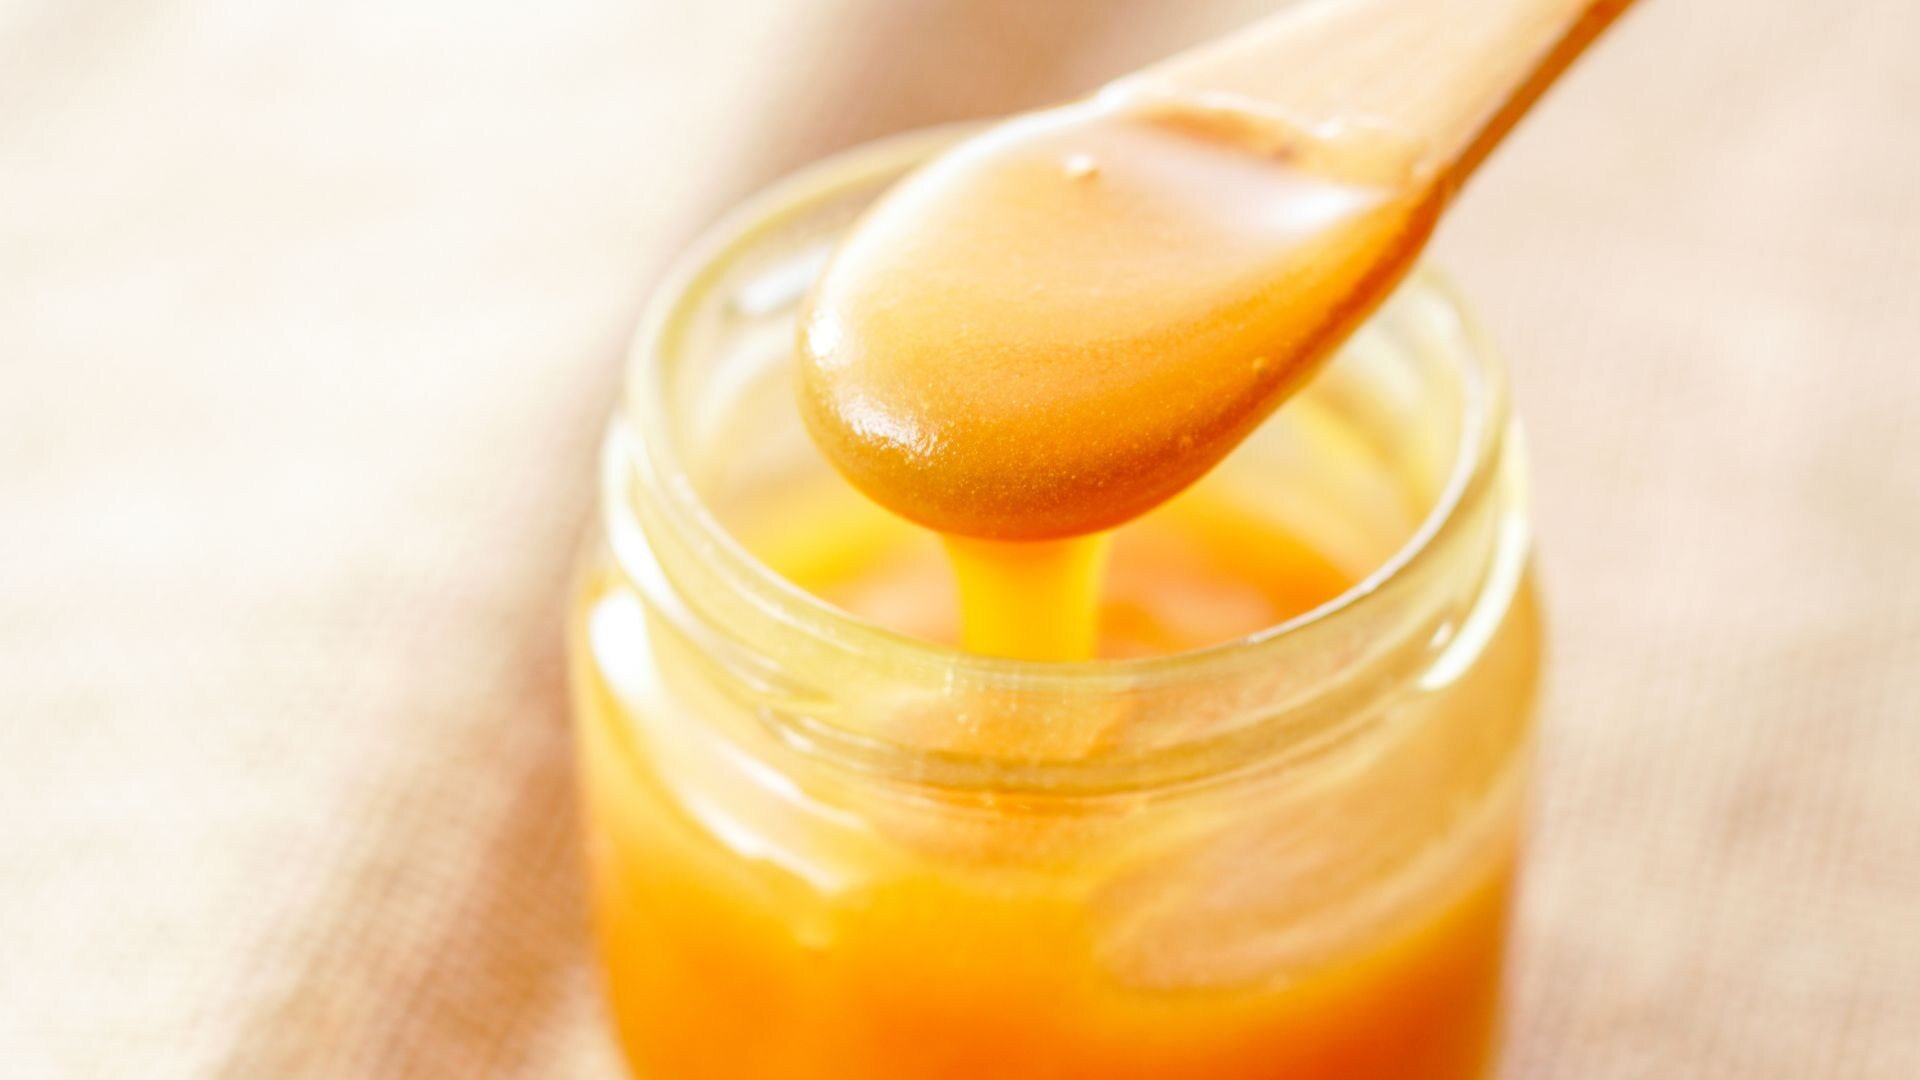 Do you use honey in cooking? Choose this product: "A teaspoon has the strength of 50 teaspoons of traditional honey"